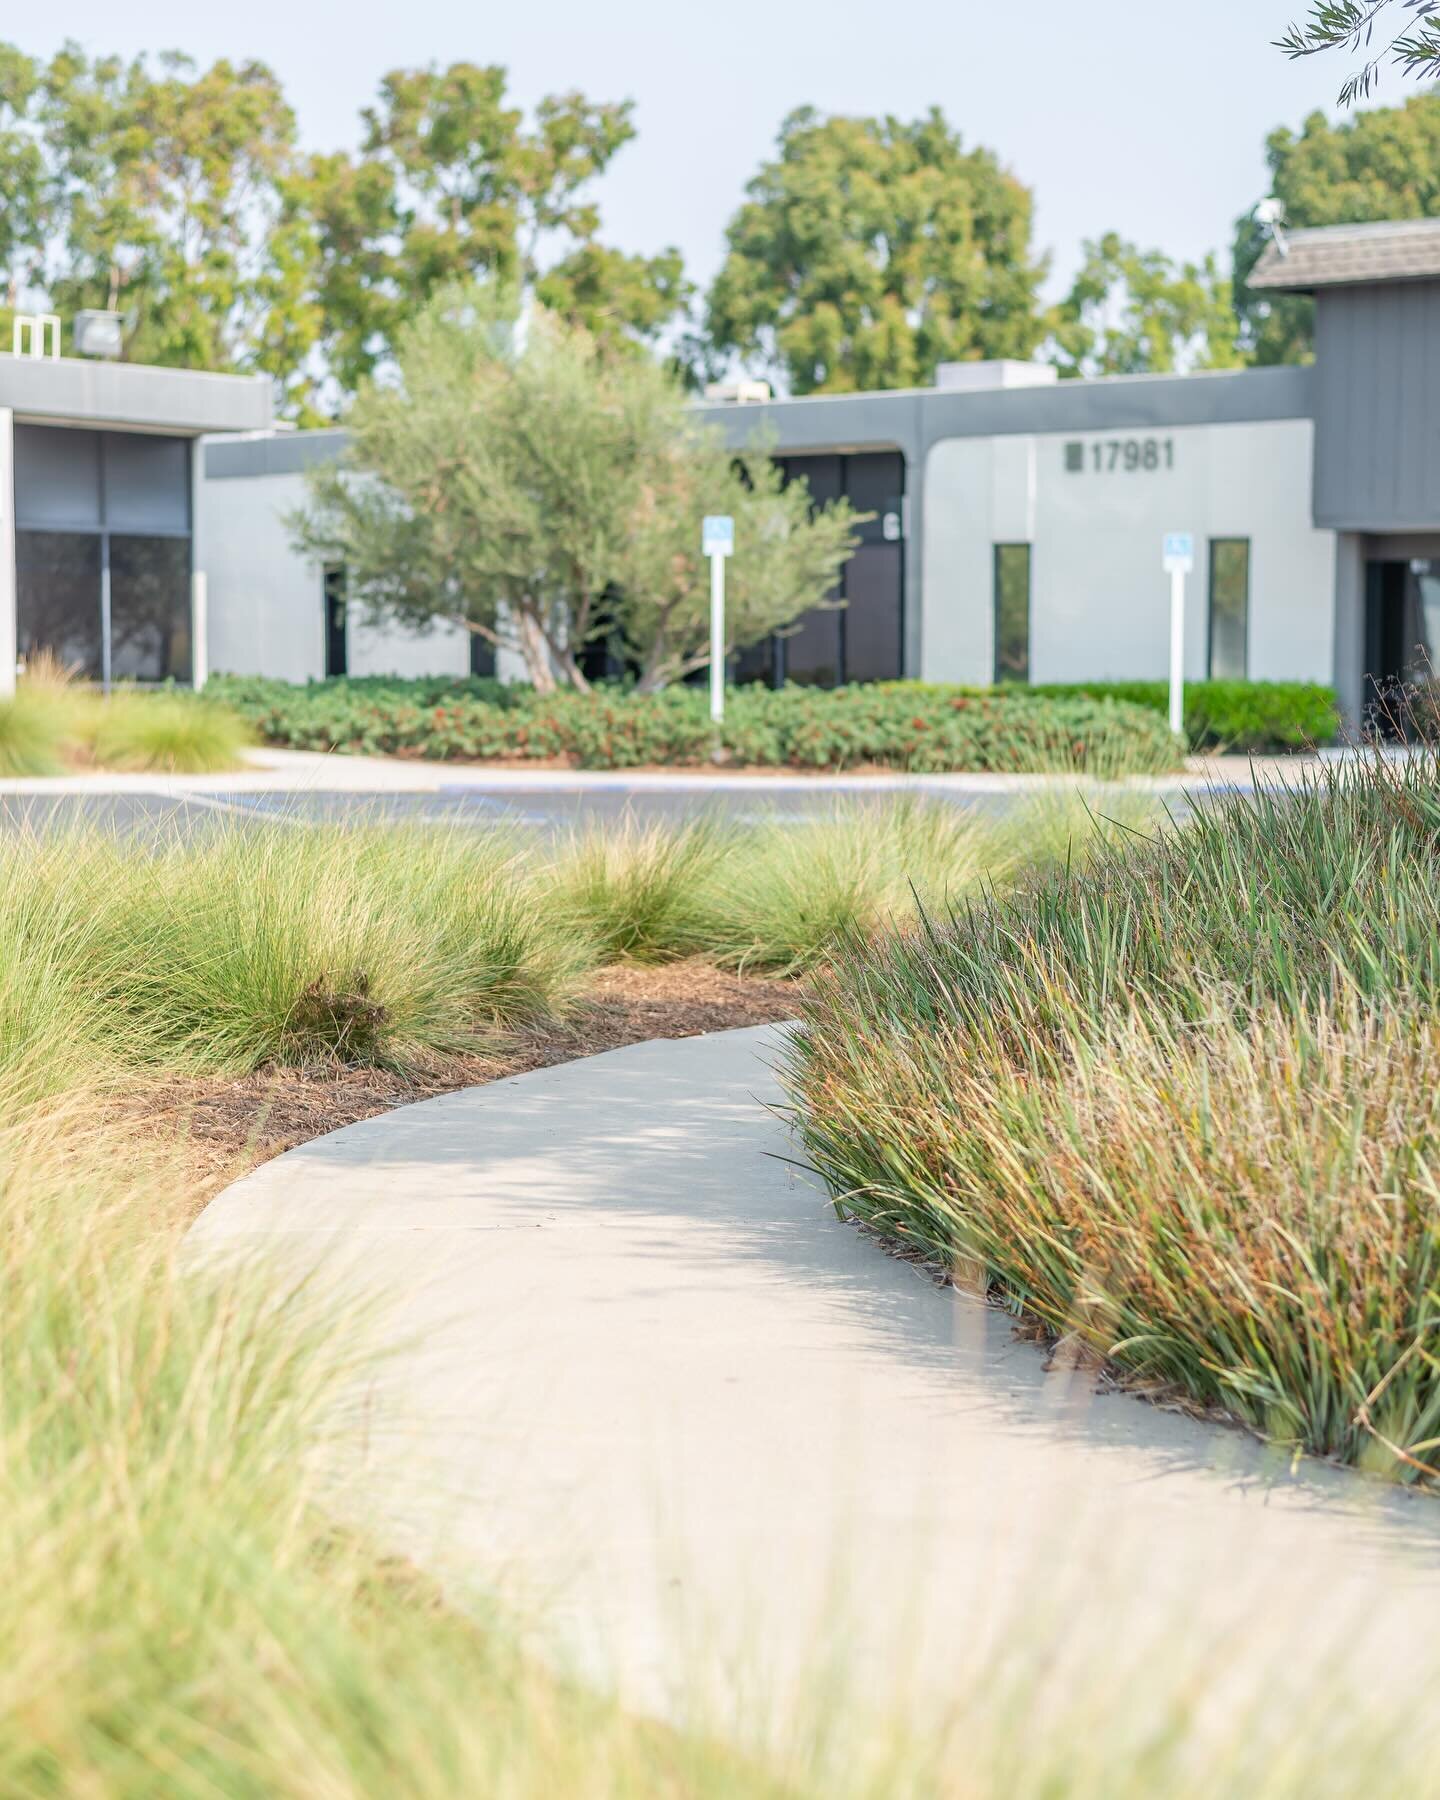 Feeling like spring over here! We&rsquo;re all about great (drought-tolerant) landscaping at our office properties. 🍃